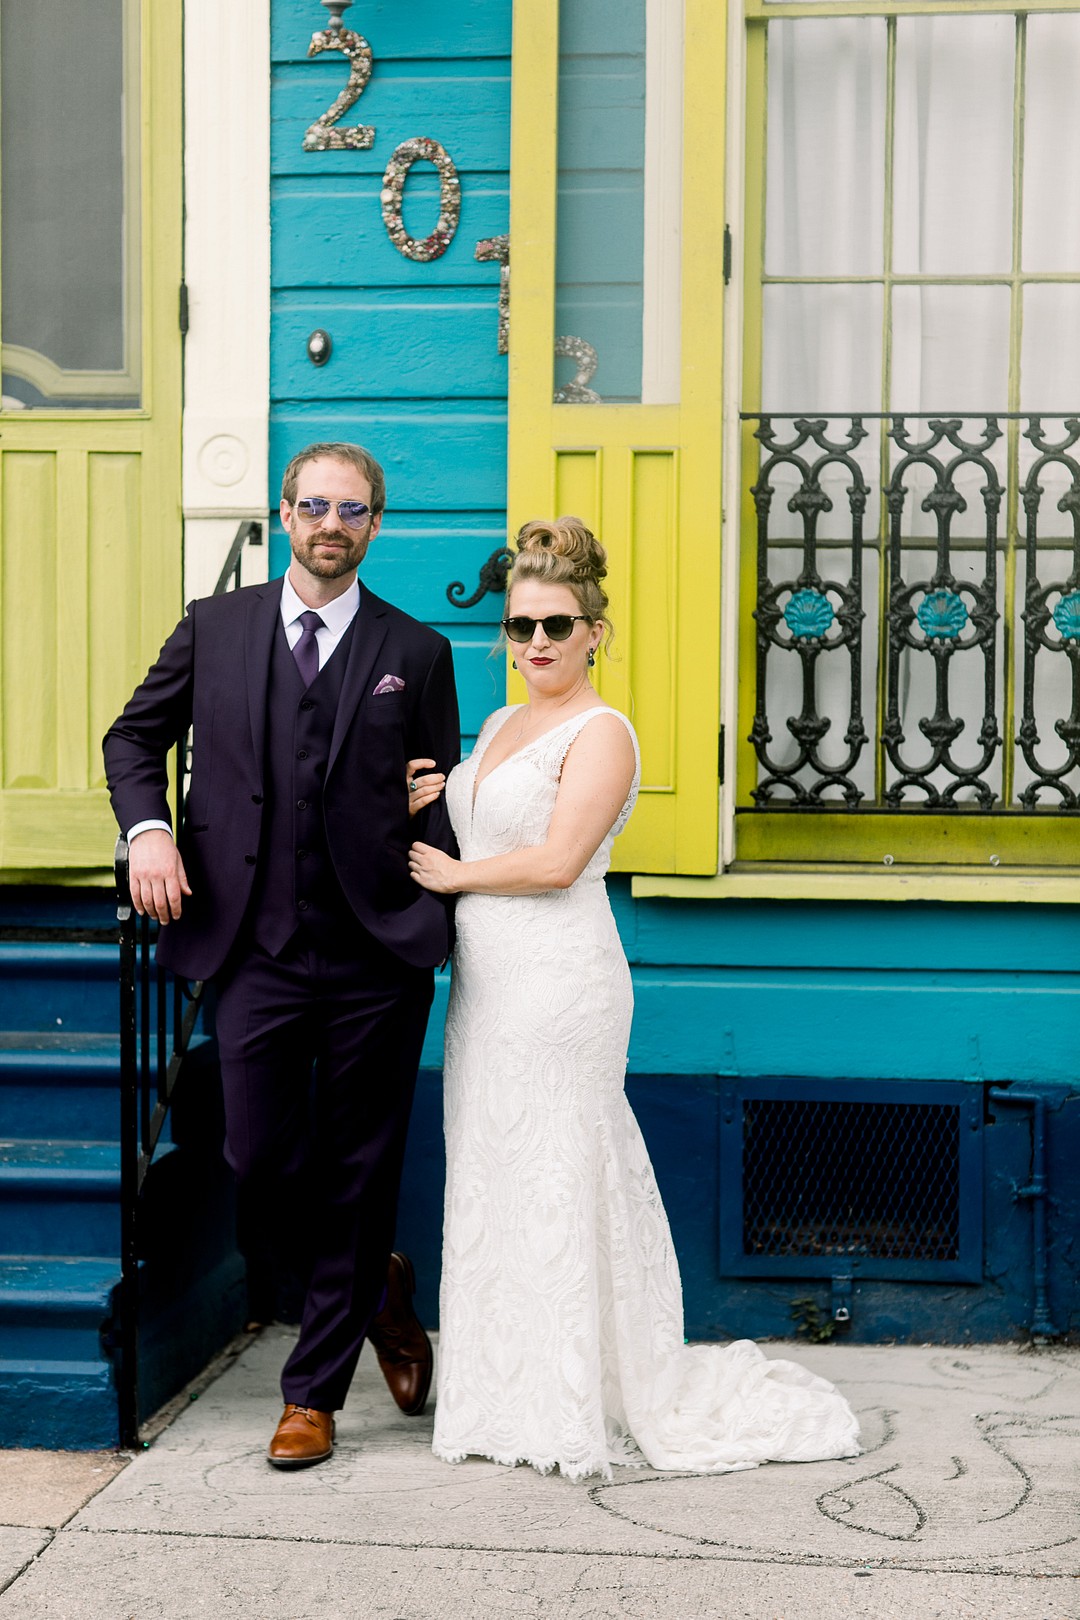 This funky wedding took place in New Orleans and was done with glitter, feathers and bright colors